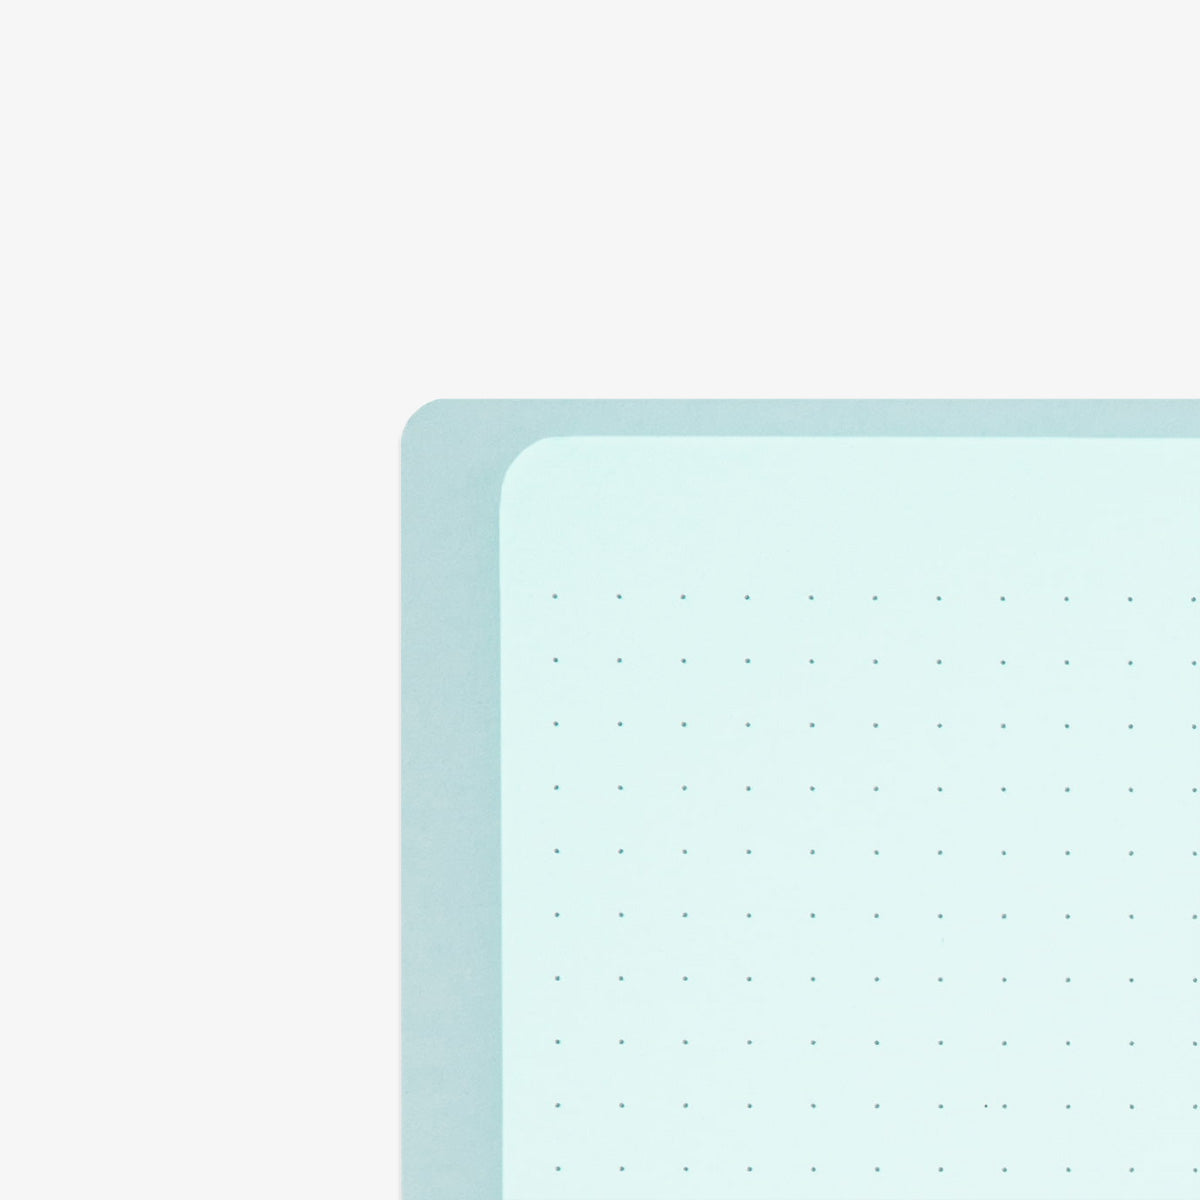 A5 RING NOTEBOOK W. DOT GRID // BLUE